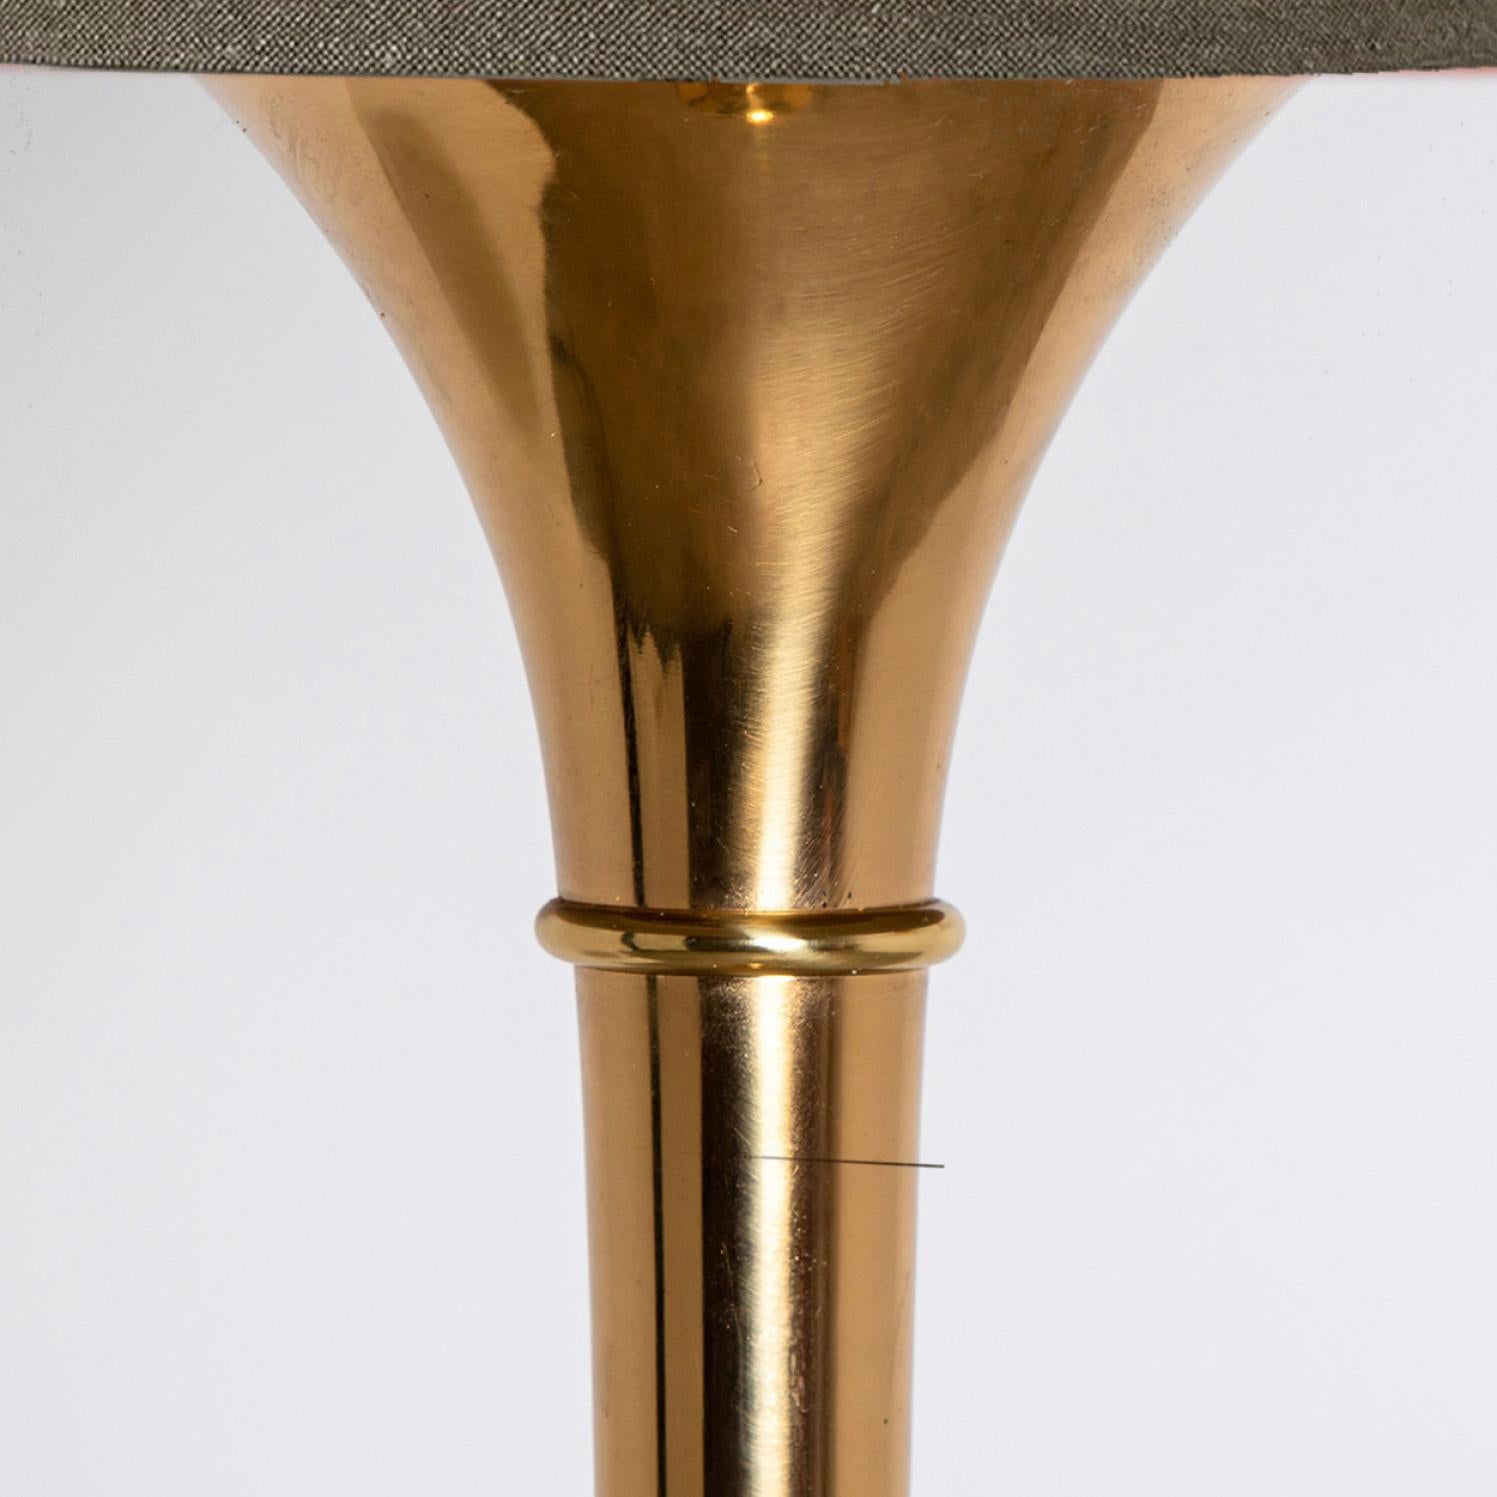 Pair of Table Lamps Gold Brass and Bamboo Shade by Ingo Maurer, Germany, 1968 For Sale 3